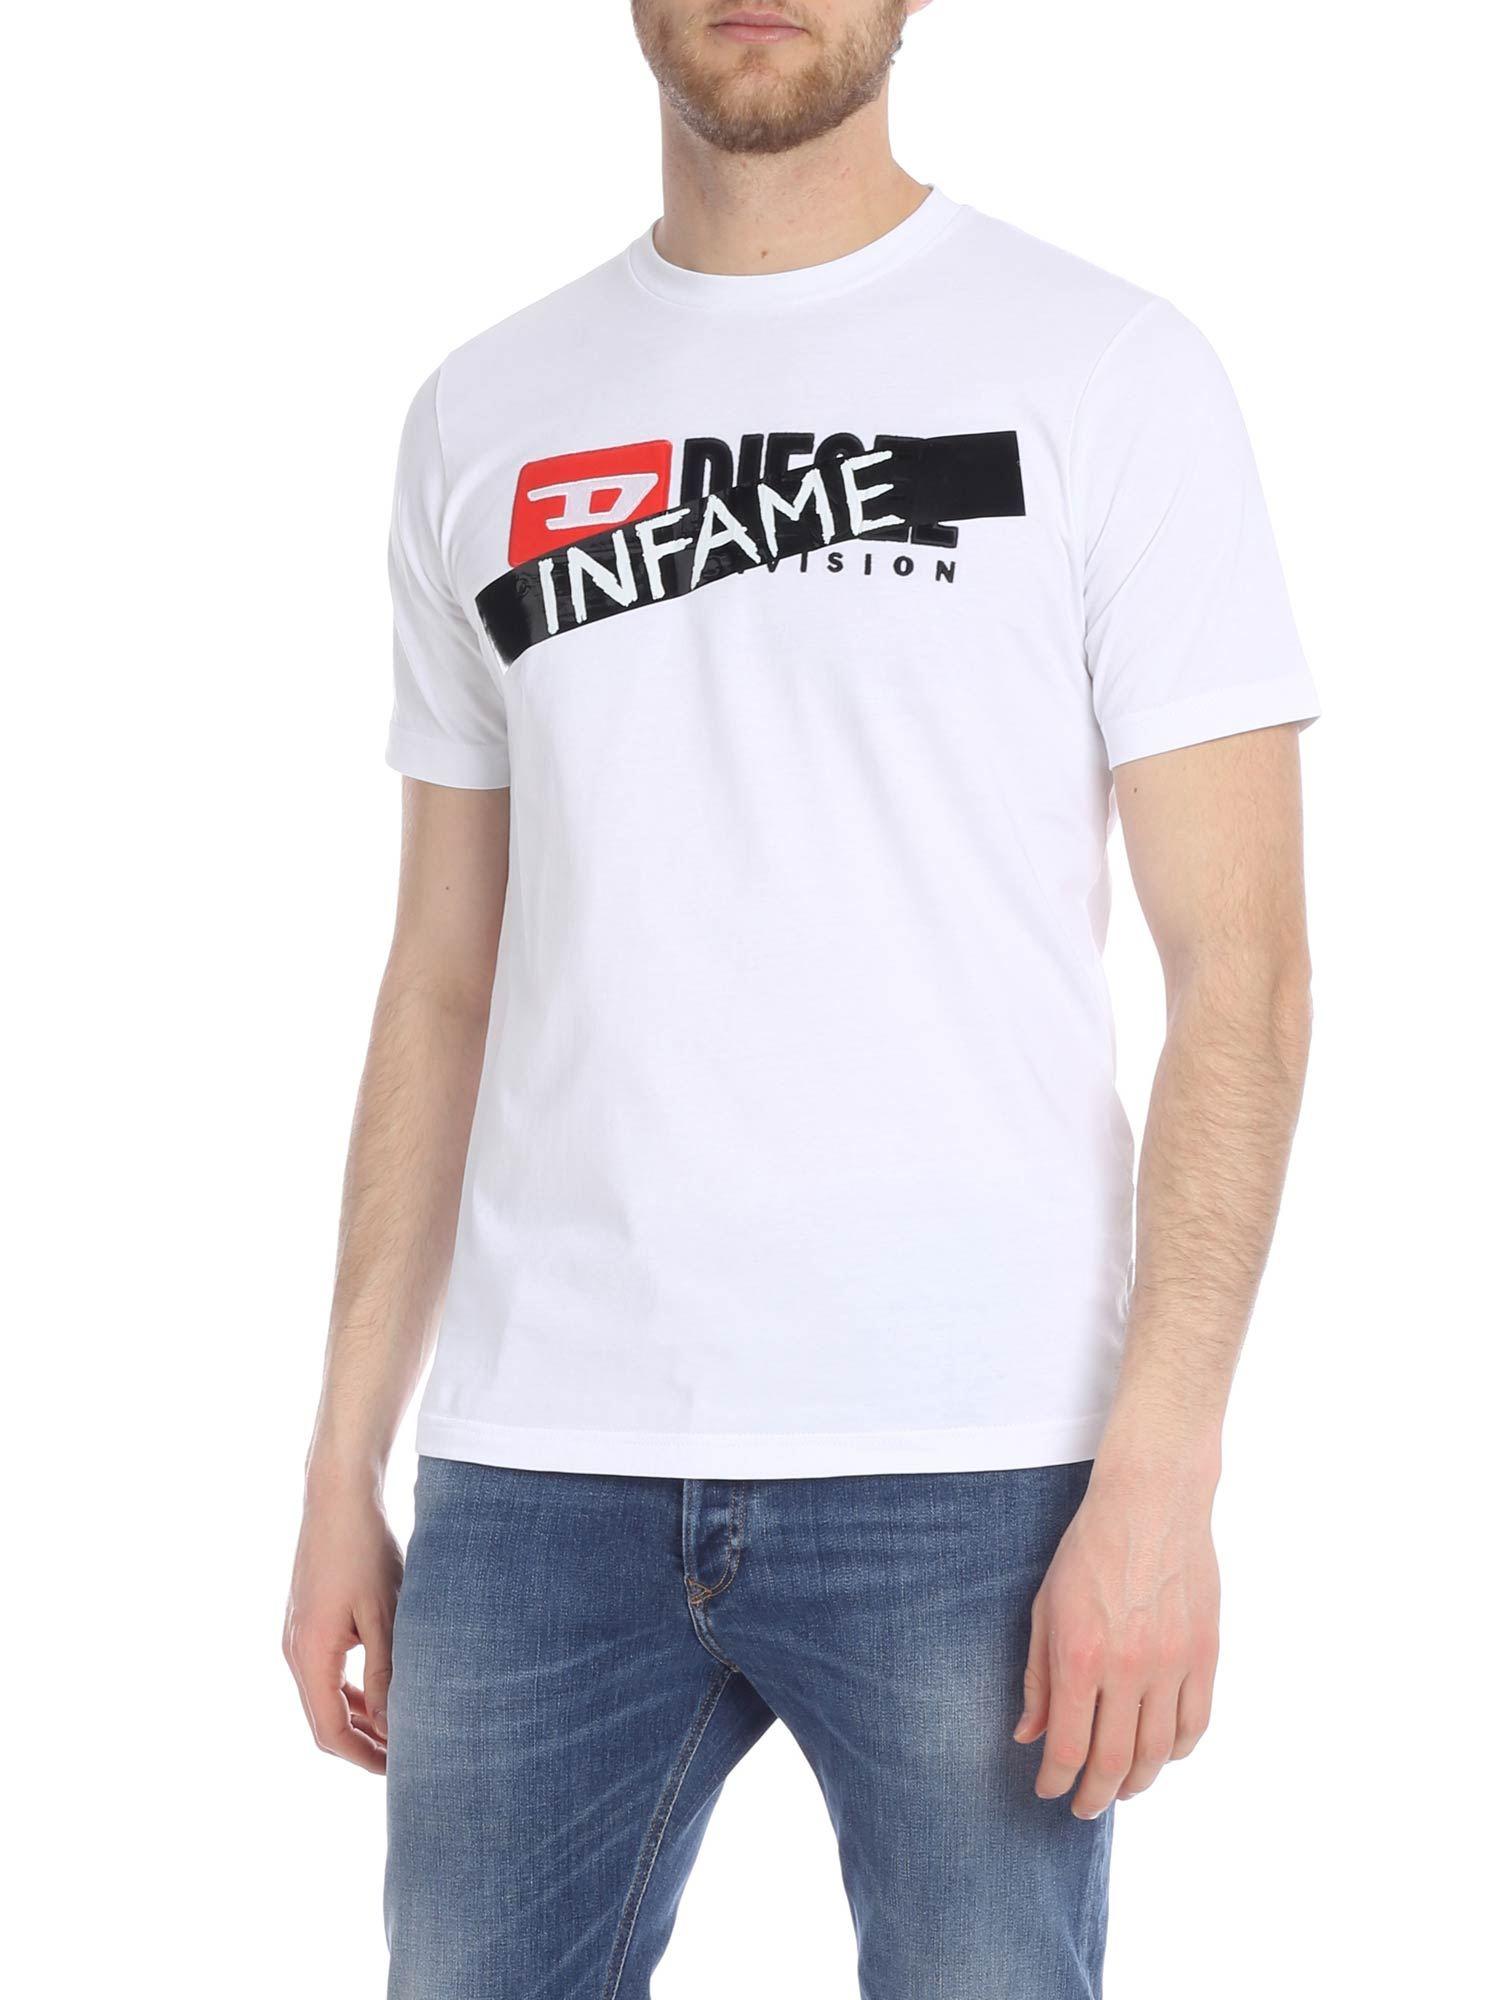 DIESEL White T-shirt With Infame Print in White for Men - Lyst